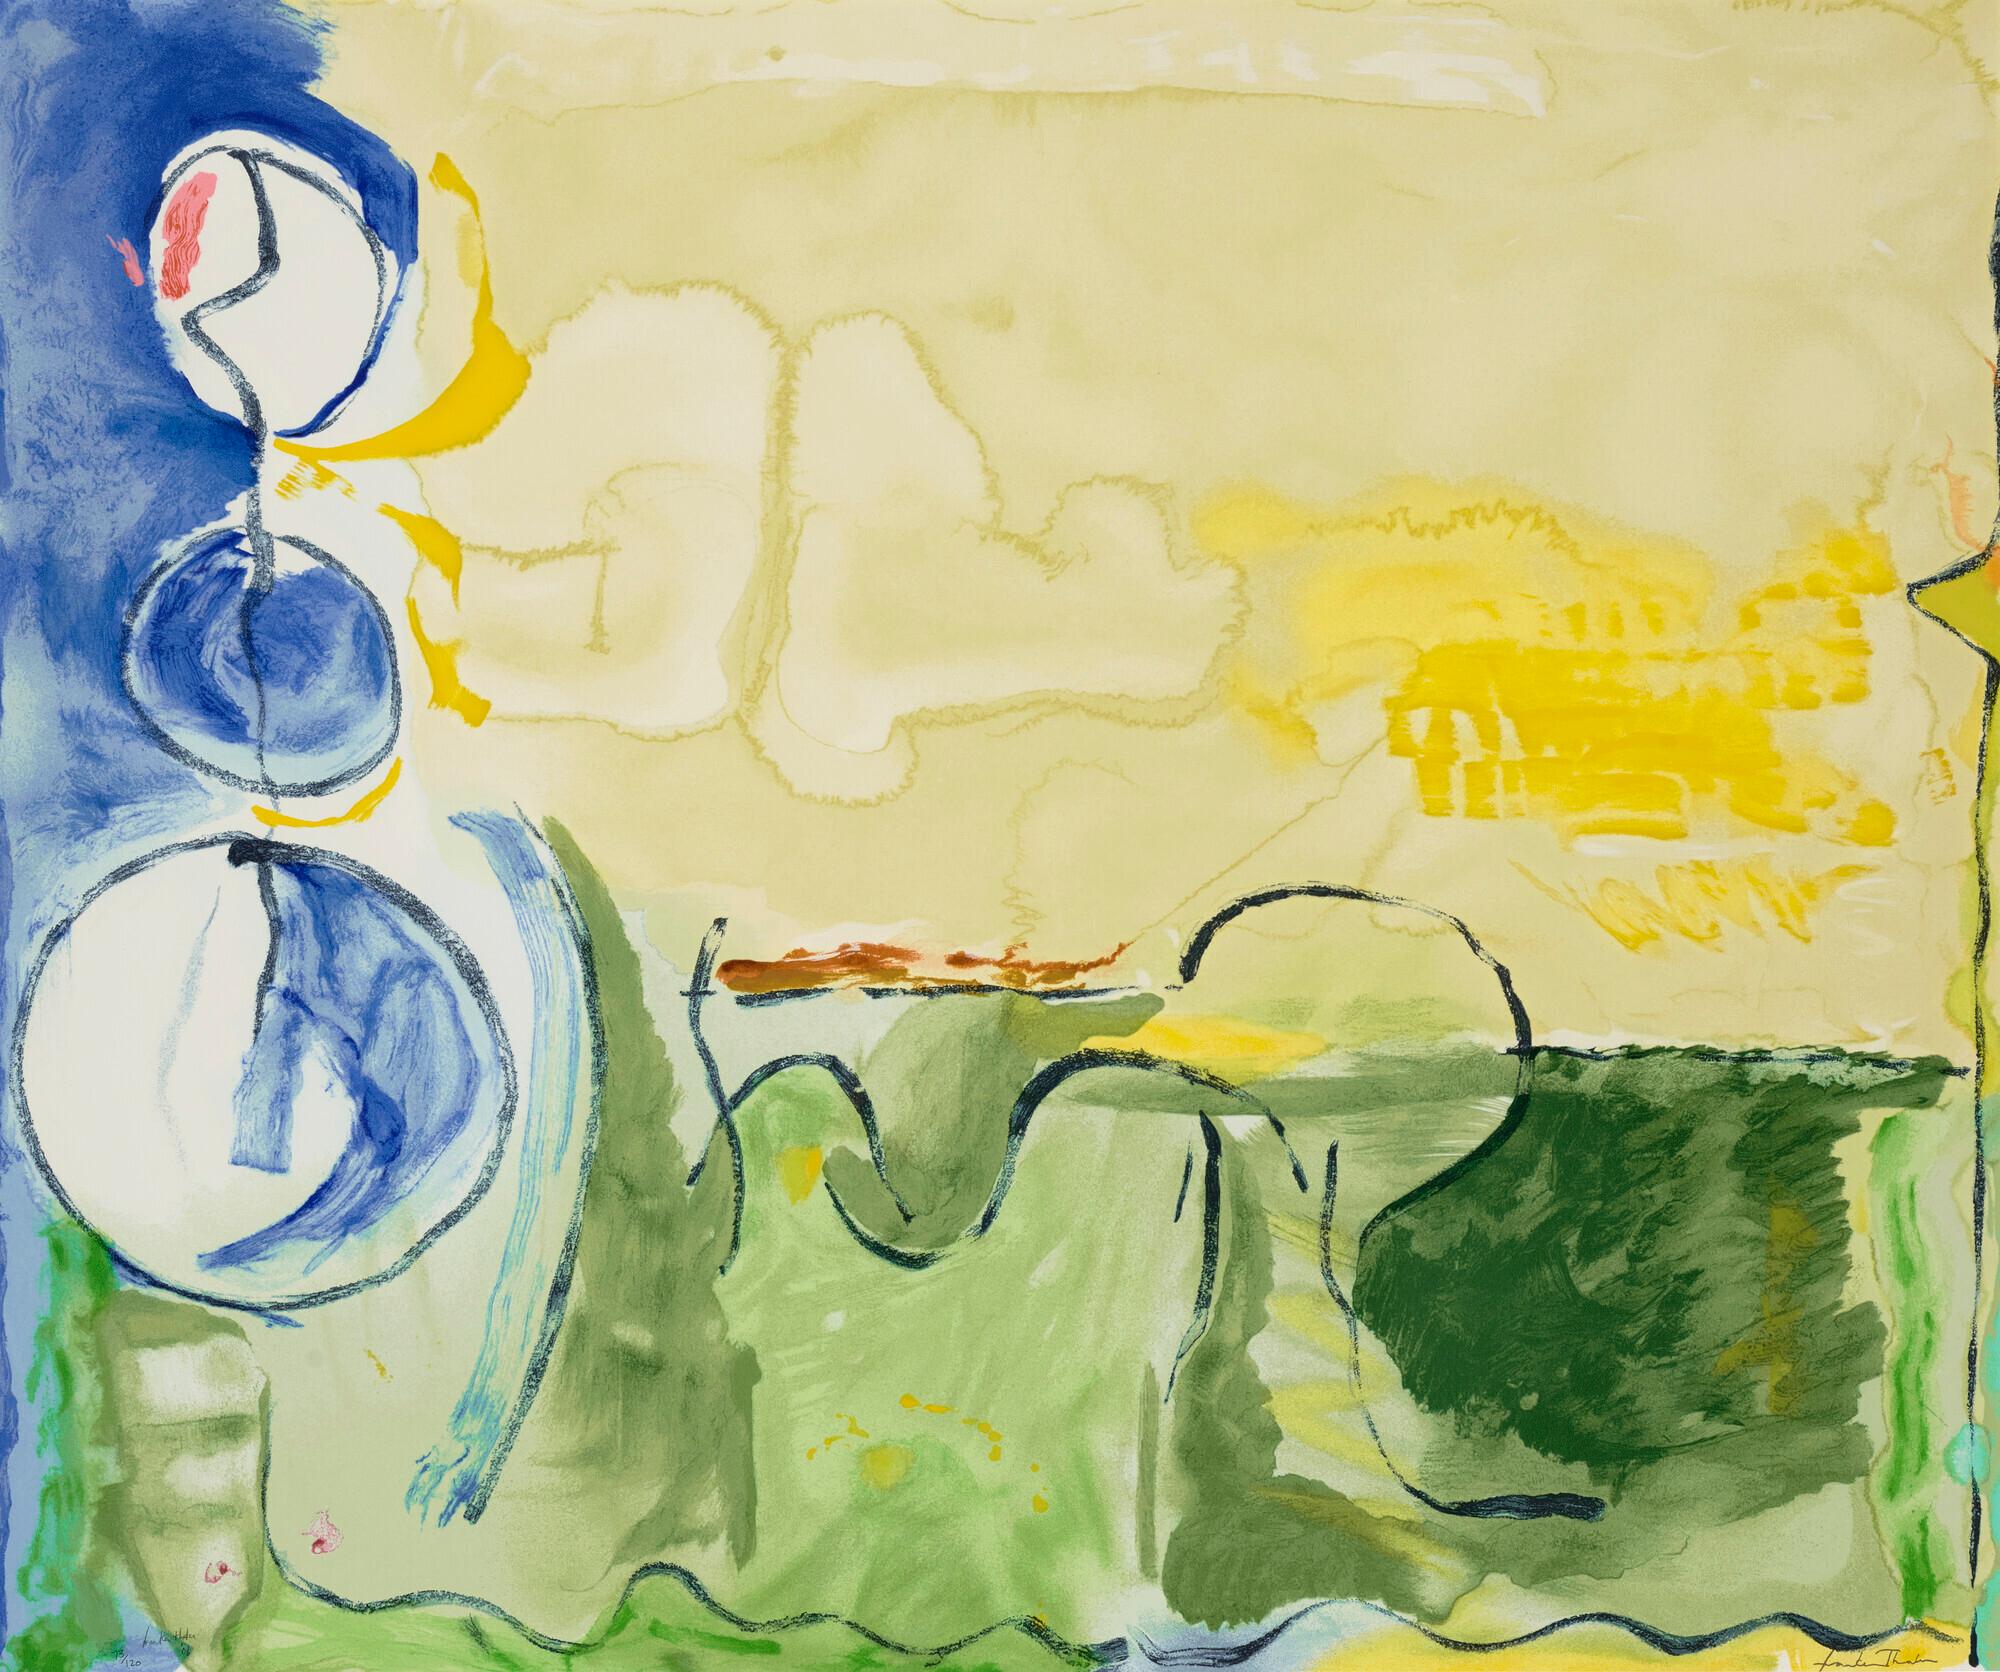 What was Helen Frankenthaler known for?